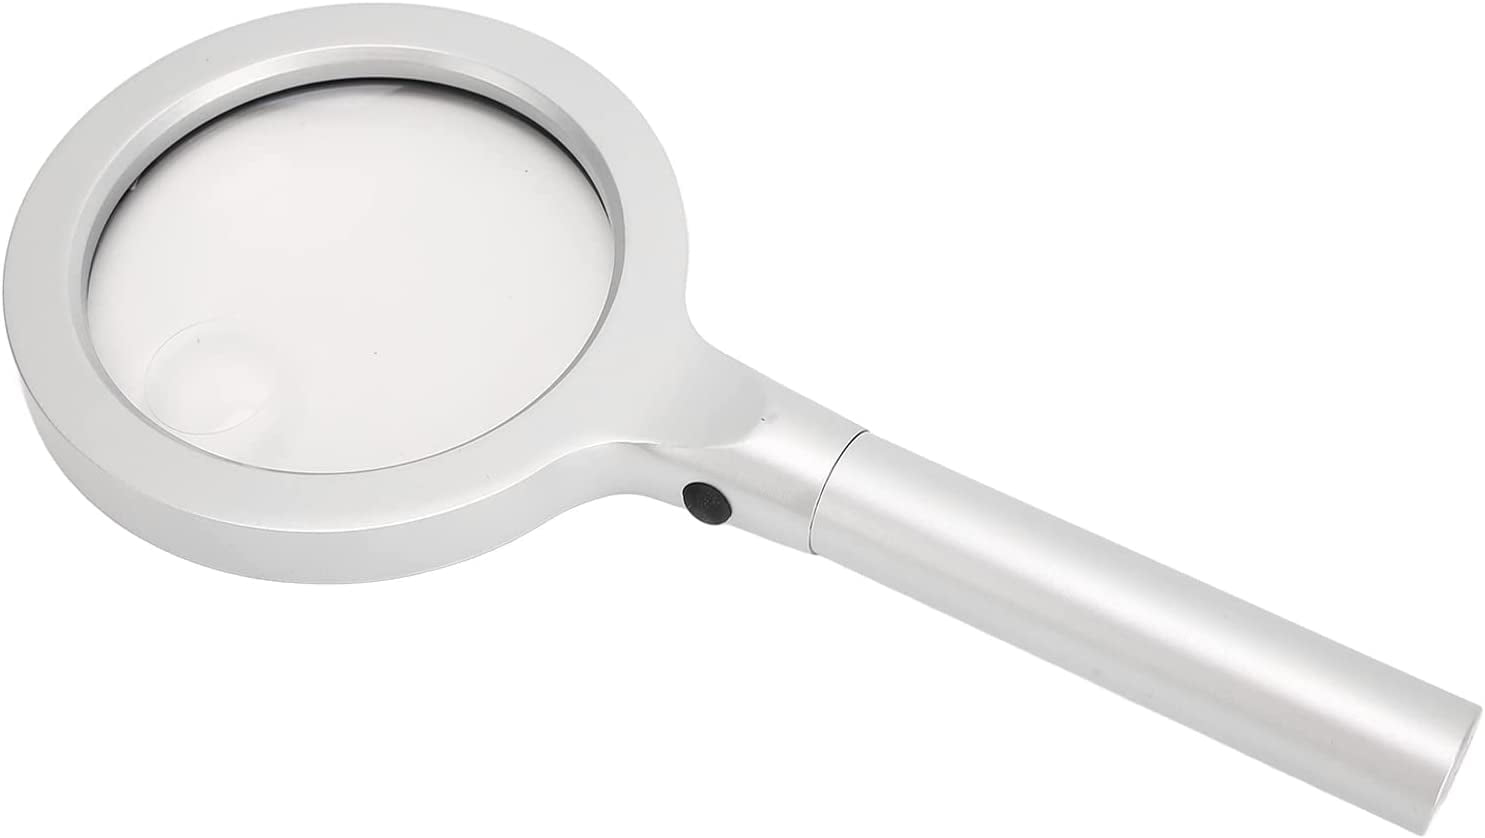 Bausch & Lomb 4X Folded Pocket Magnifier Round 36mm Lens